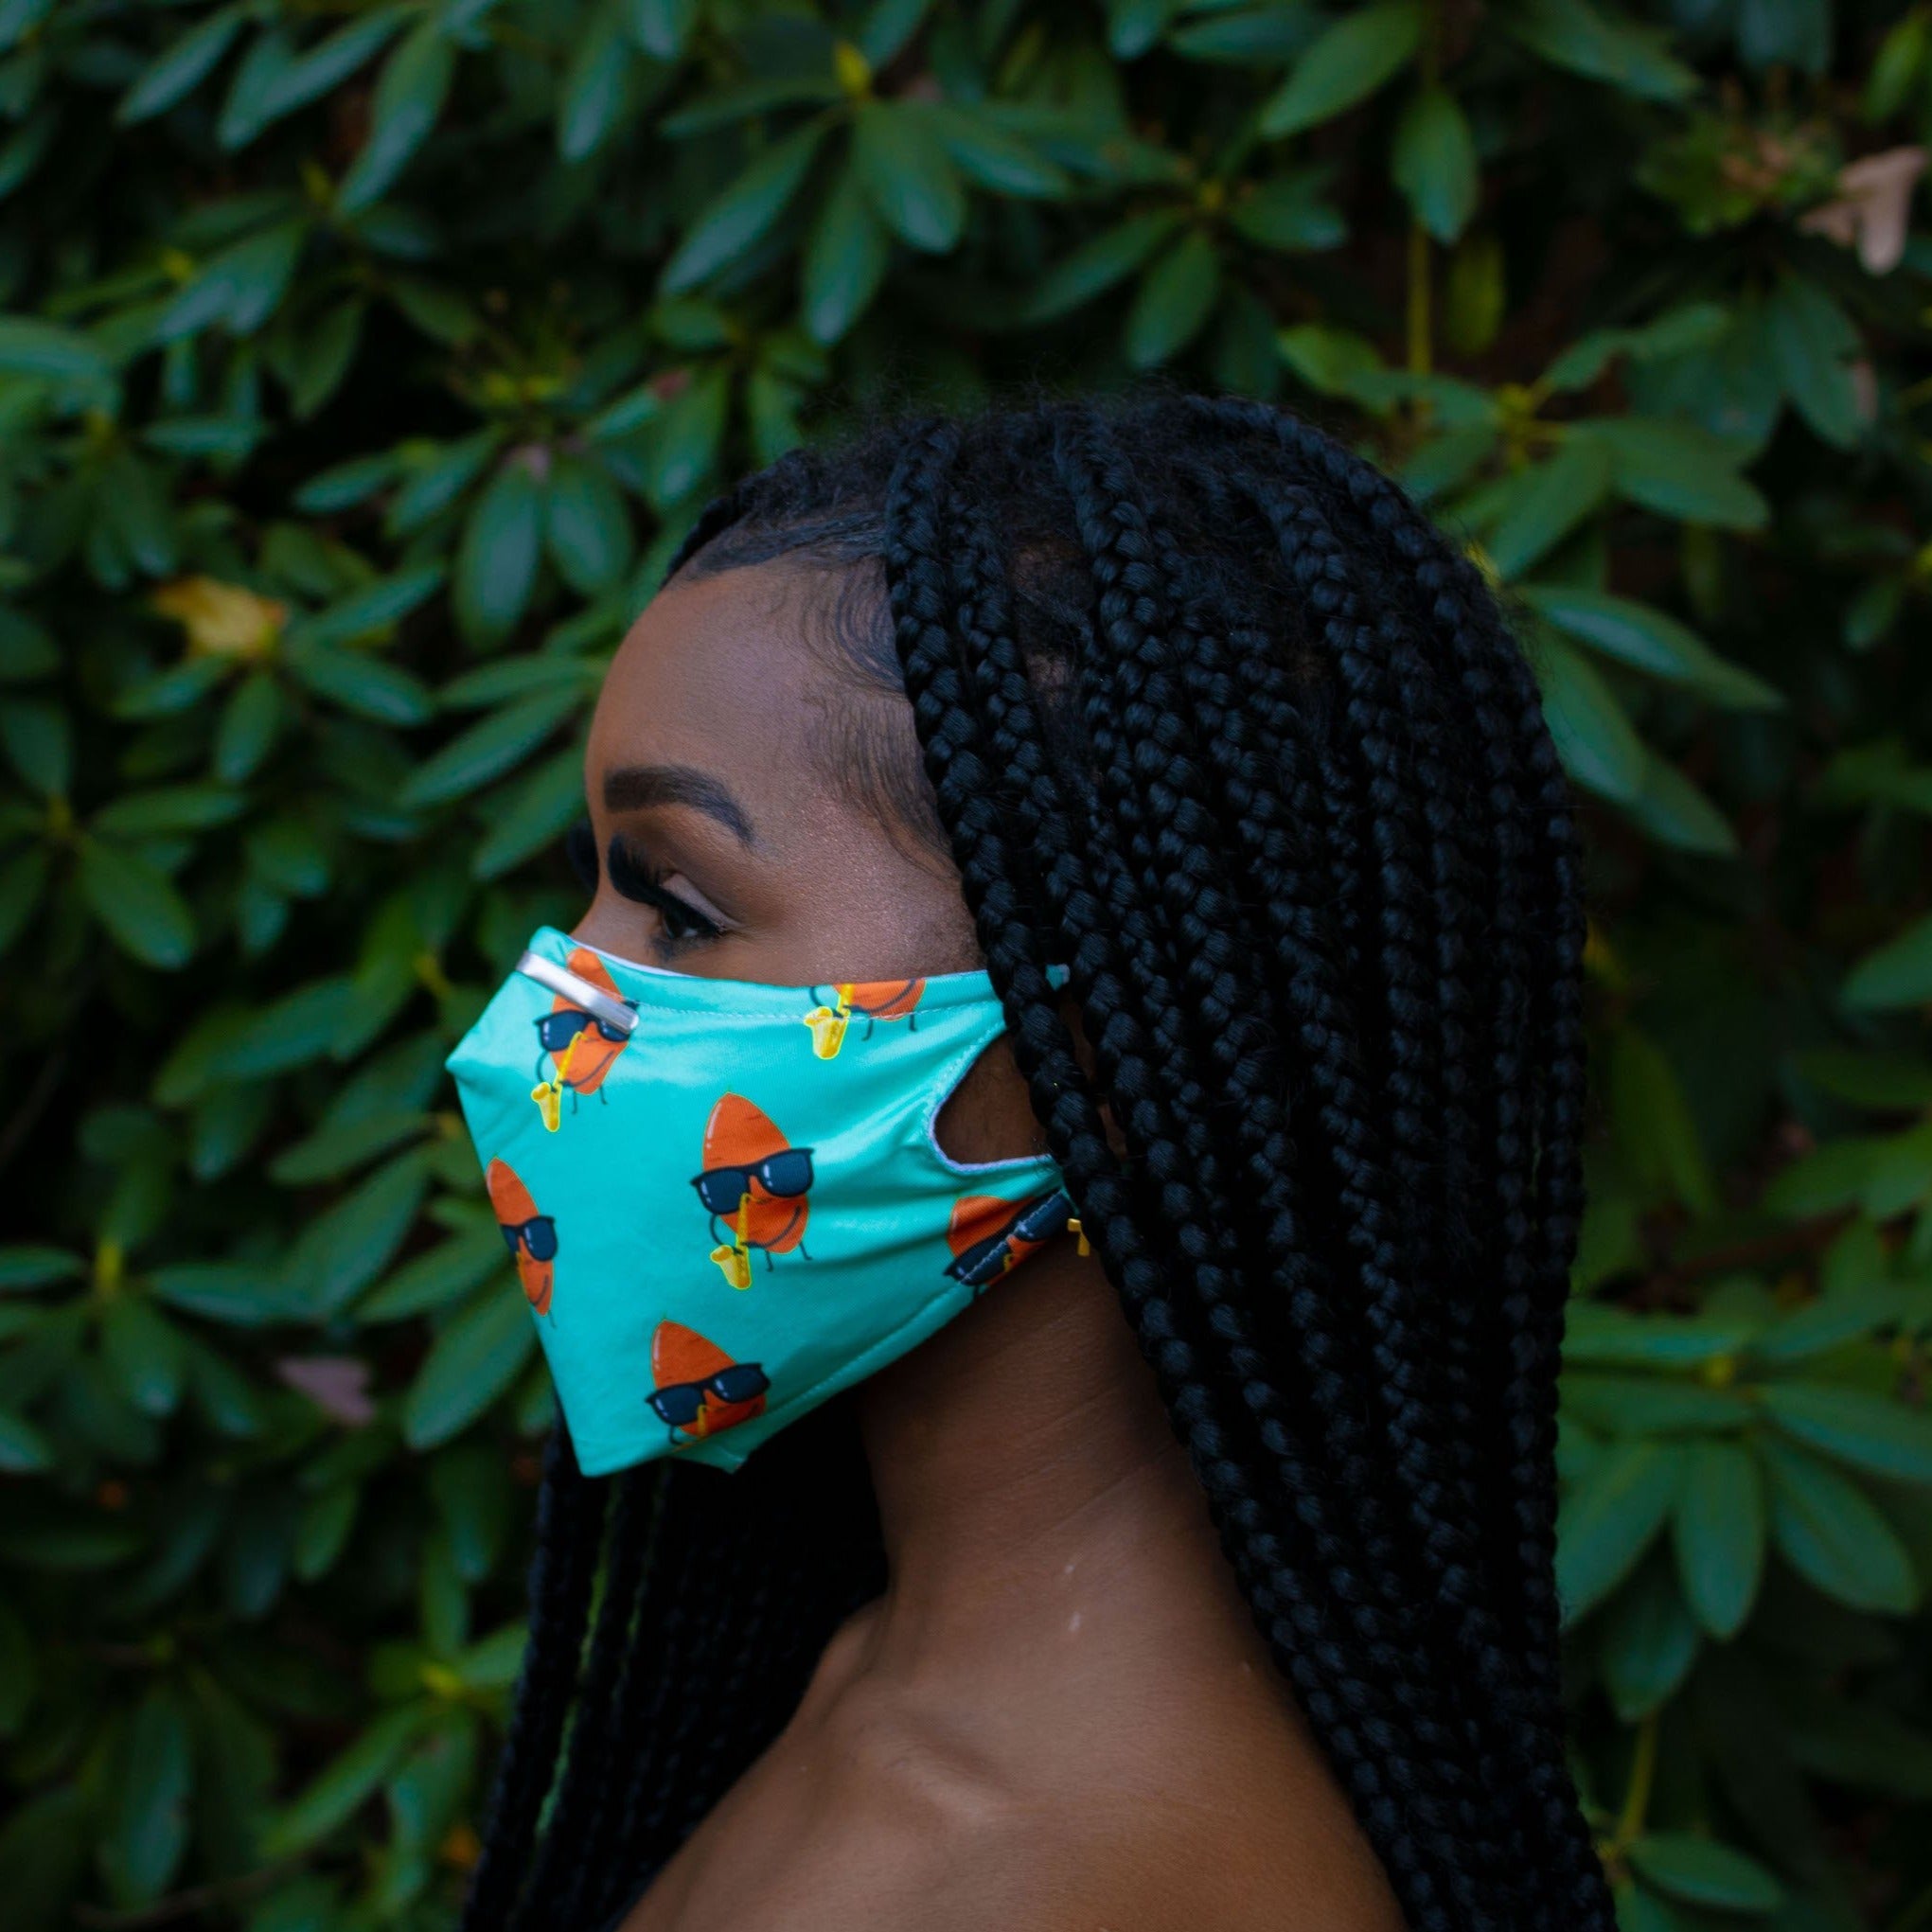 Summer Blues Mask: Adjustable 3-Layer Mask with Filters - Meeting World Health Organization Standards